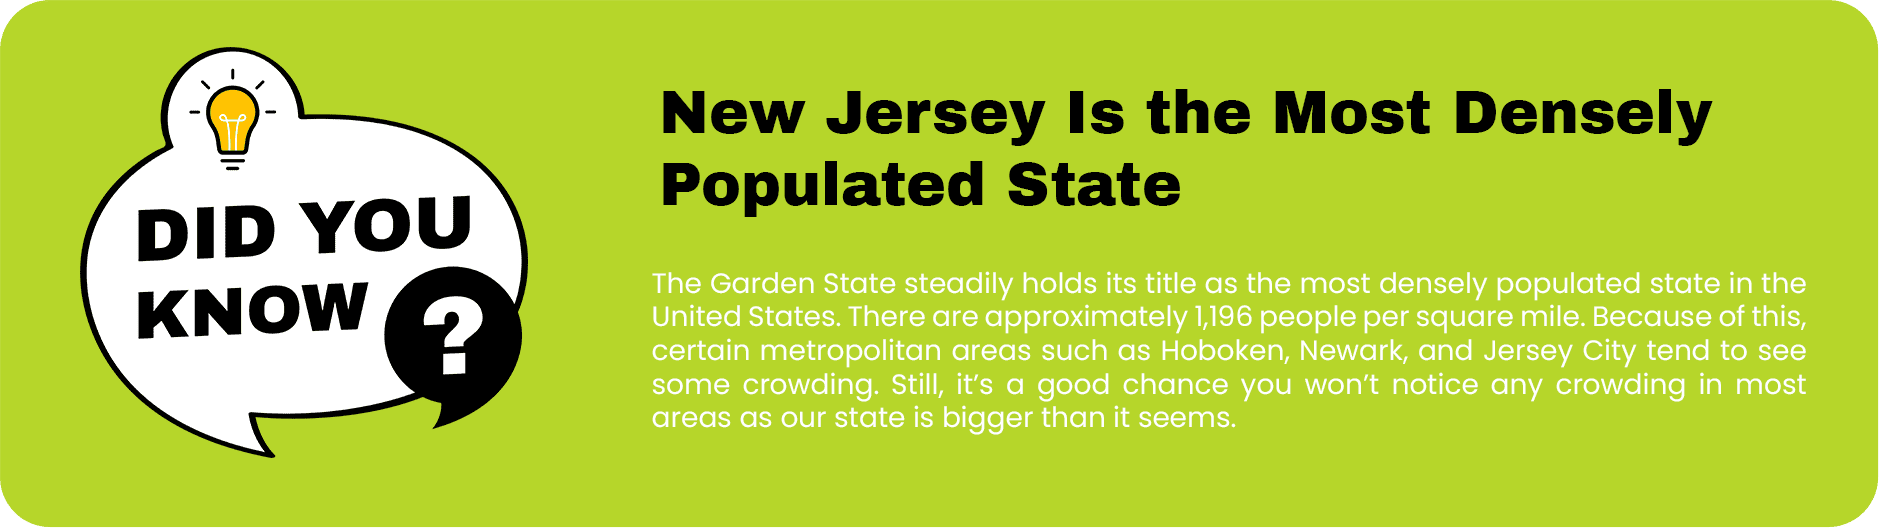 Didactic infographic professionally presenting the fact that New Jersey is the most densely populated state in the United States.